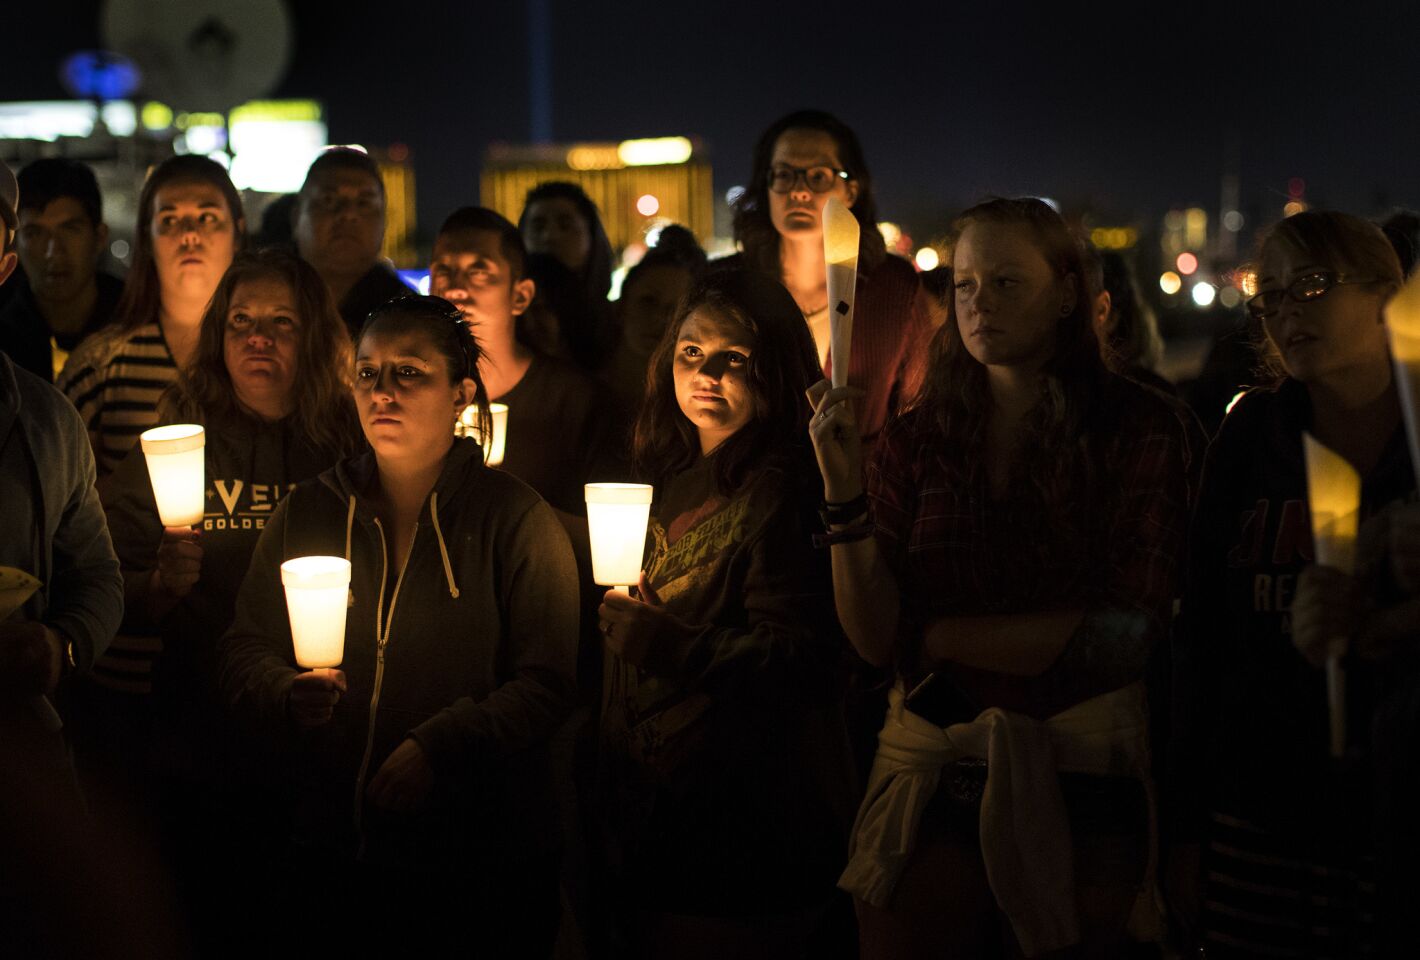 A candlelight vigil at Town Square in Las Vegas to remember the shooting victims.